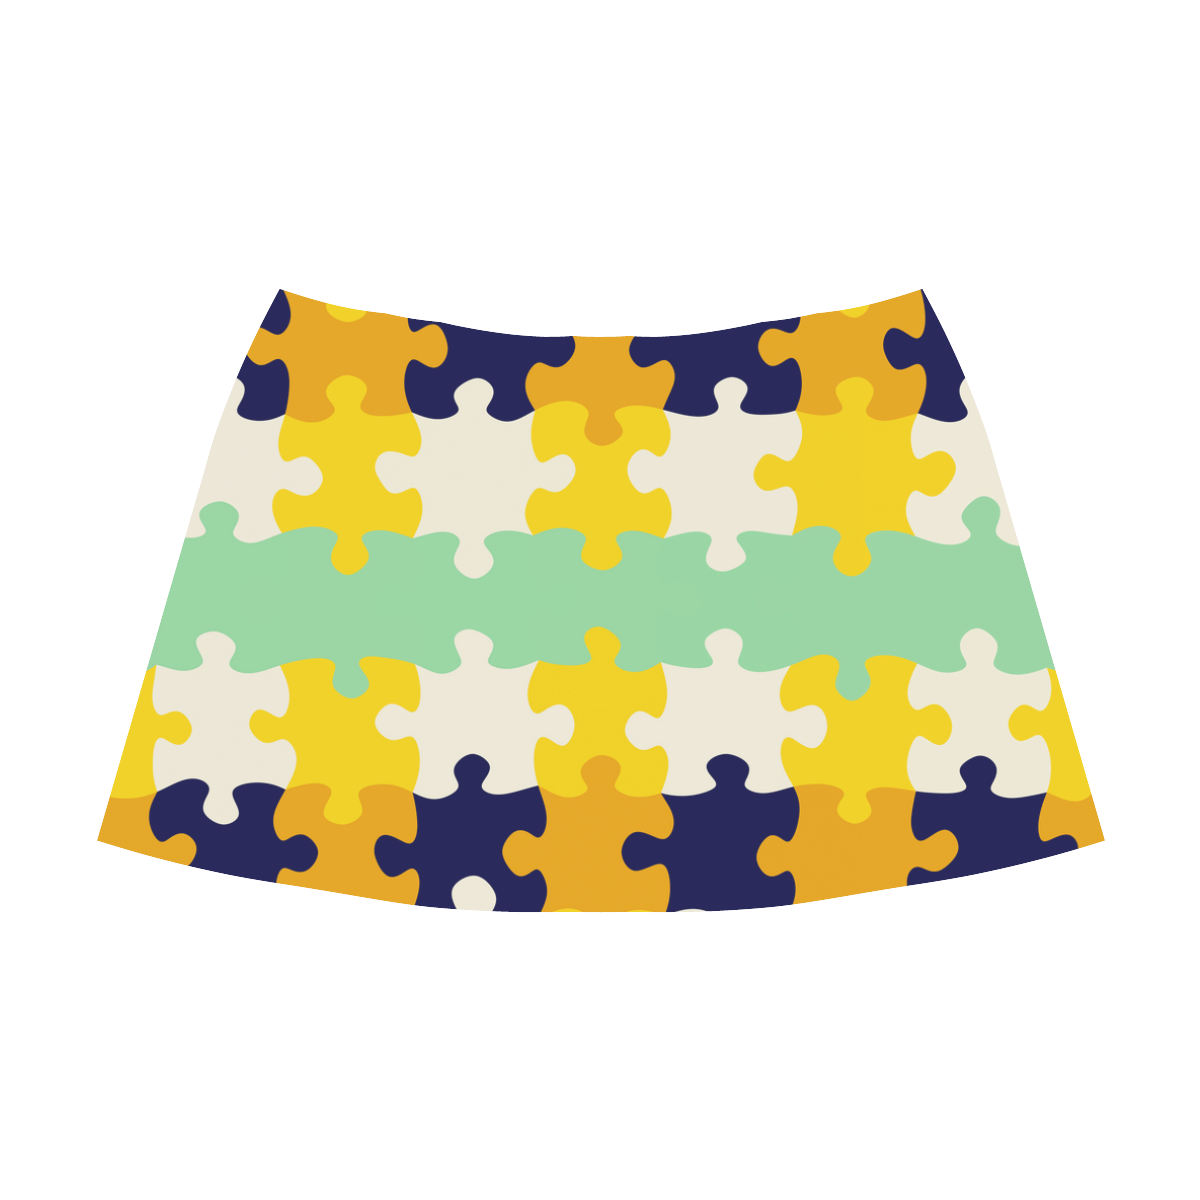 Puzzle pieces Mnemosyne Women's Crepe Skirt (Model D16)